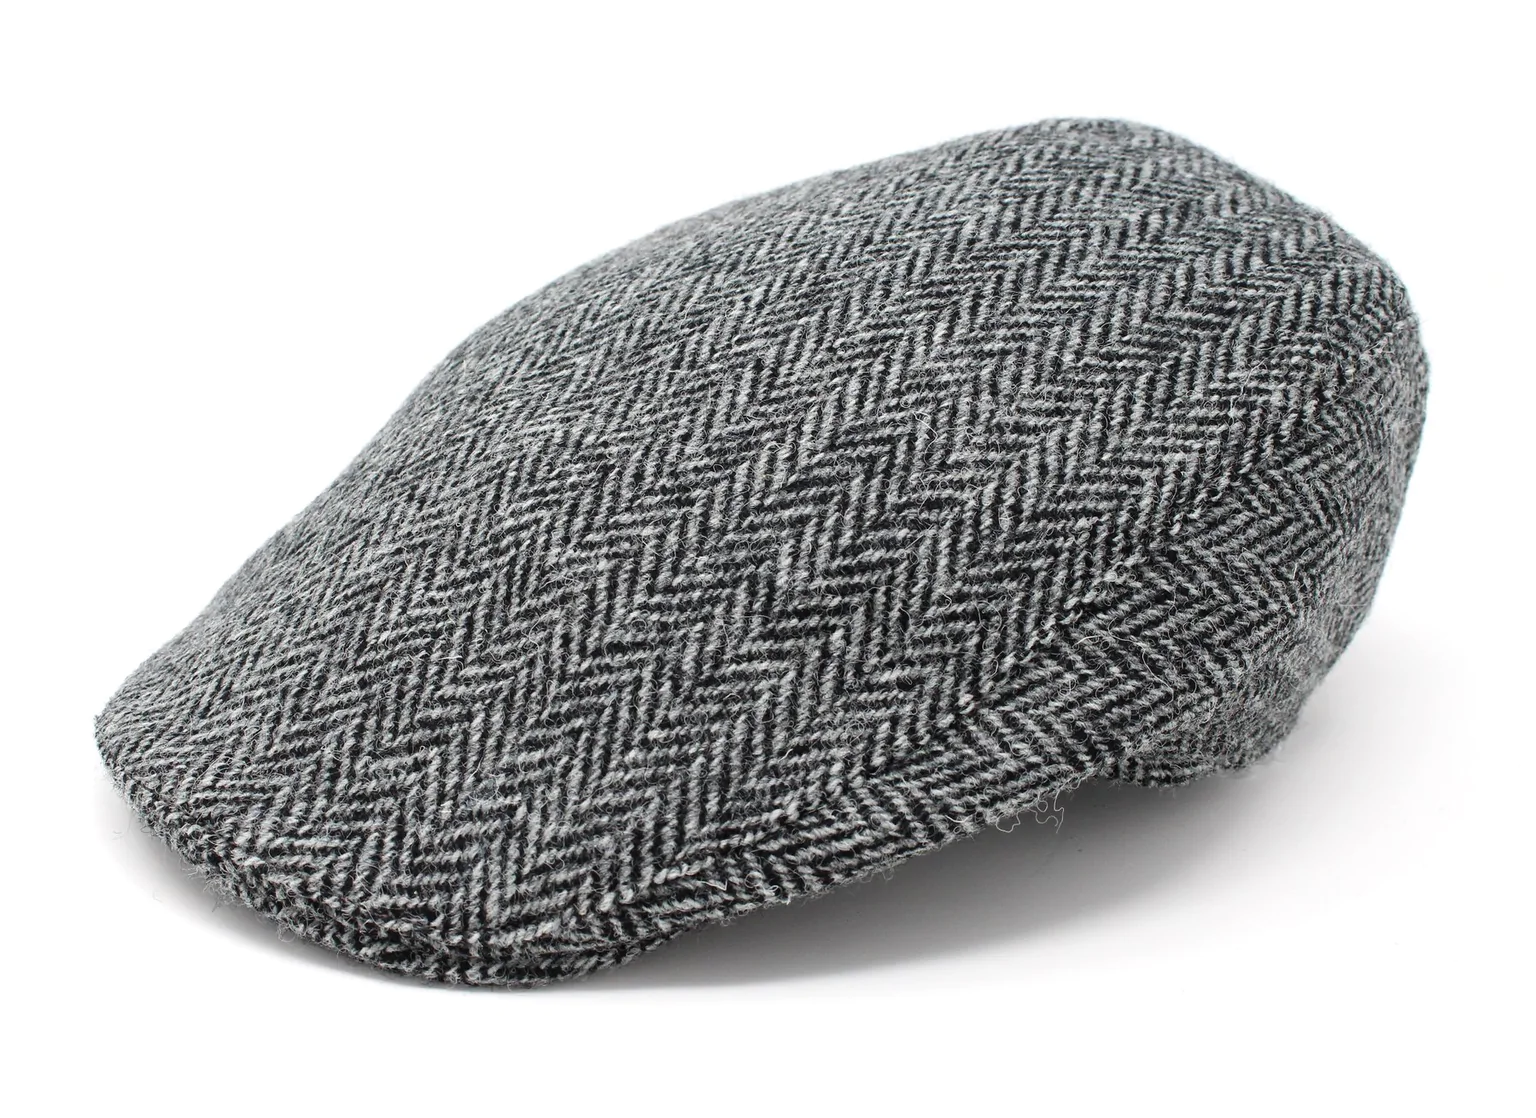 A close up of a hat on a white background